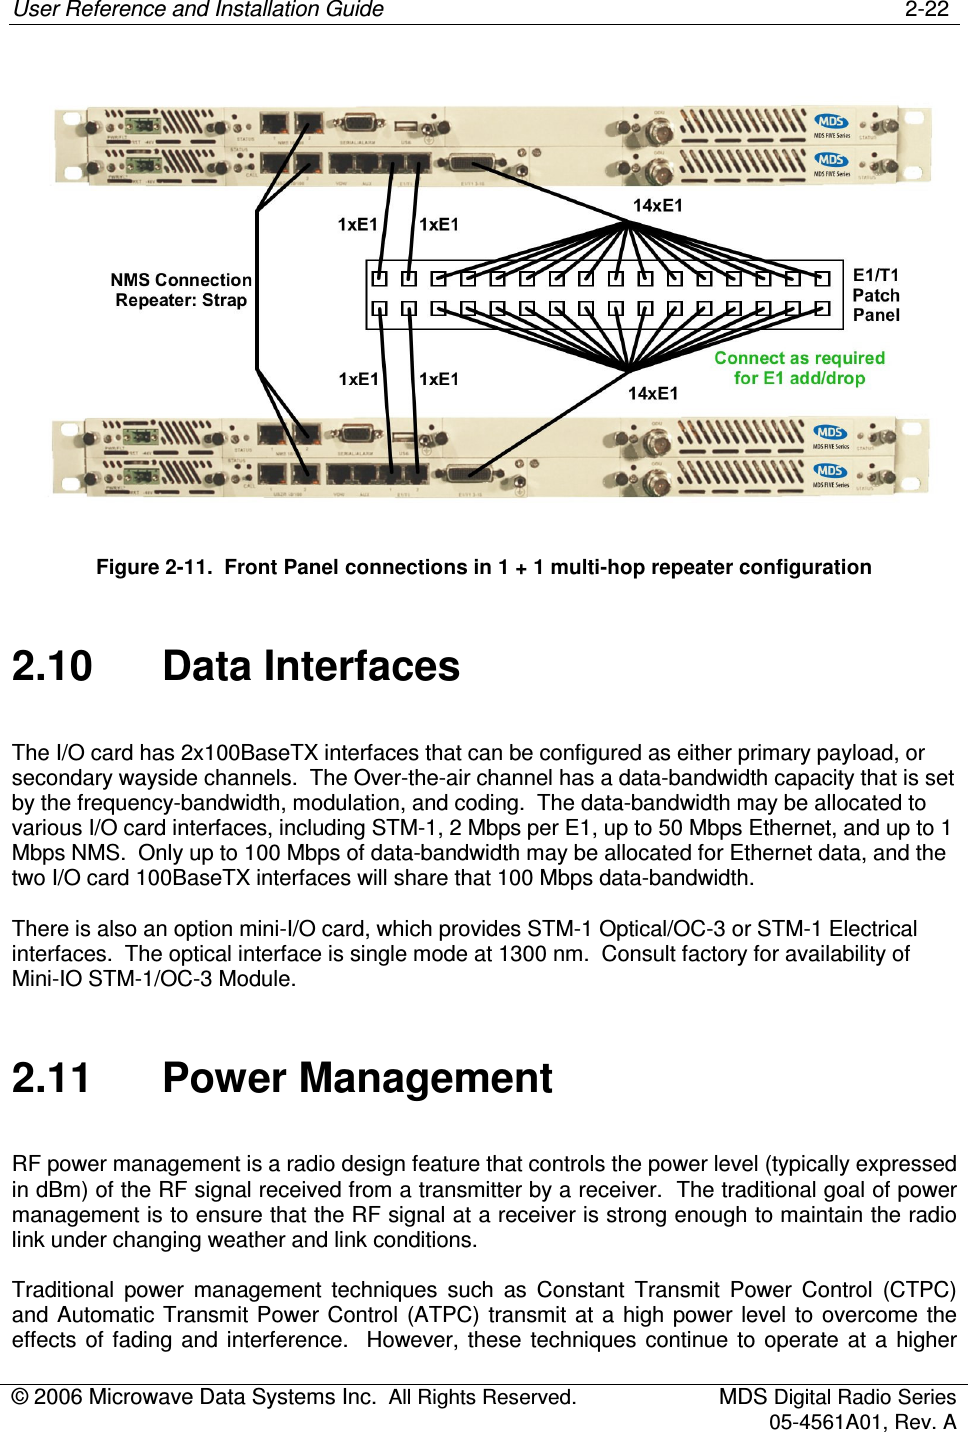 User Reference and Installation Guide    2-22 © 2006 Microwave Data Systems Inc.  All Rights Reserved.  MDS Digital Radio Series 05-4561A01, Rev. A   Figure 2-11.  Front Panel connections in 1 + 1 multi-hop repeater configuration 2.10  Data Interfaces The I/O card has 2x100BaseTX interfaces that can be configured as either primary payload, or secondary wayside channels.  The Over-the-air channel has a data-bandwidth capacity that is set by the frequency-bandwidth, modulation, and coding.  The data-bandwidth may be allocated to various I/O card interfaces, including STM-1, 2 Mbps per E1, up to 50 Mbps Ethernet, and up to 1 Mbps NMS.  Only up to 100 Mbps of data-bandwidth may be allocated for Ethernet data, and the two I/O card 100BaseTX interfaces will share that 100 Mbps data-bandwidth. There is also an option mini-I/O card, which provides STM-1 Optical/OC-3 or STM-1 Electrical interfaces.  The optical interface is single mode at 1300 nm.  Consult factory for availability of Mini-IO STM-1/OC-3 Module. 2.11  Power Management RF power management is a radio design feature that controls the power level (typically expressed in dBm) of the RF signal received from a transmitter by a receiver.  The traditional goal of power management is to ensure that the RF signal at a receiver is strong enough to maintain the radio link under changing weather and link conditions. Traditional  power  management  techniques  such  as  Constant  Transmit  Power  Control  (CTPC) and Automatic Transmit Power Control (ATPC) transmit at  a  high power level  to  overcome the effects  of  fading and  interference.    However, these  techniques  continue  to  operate  at  a  higher 